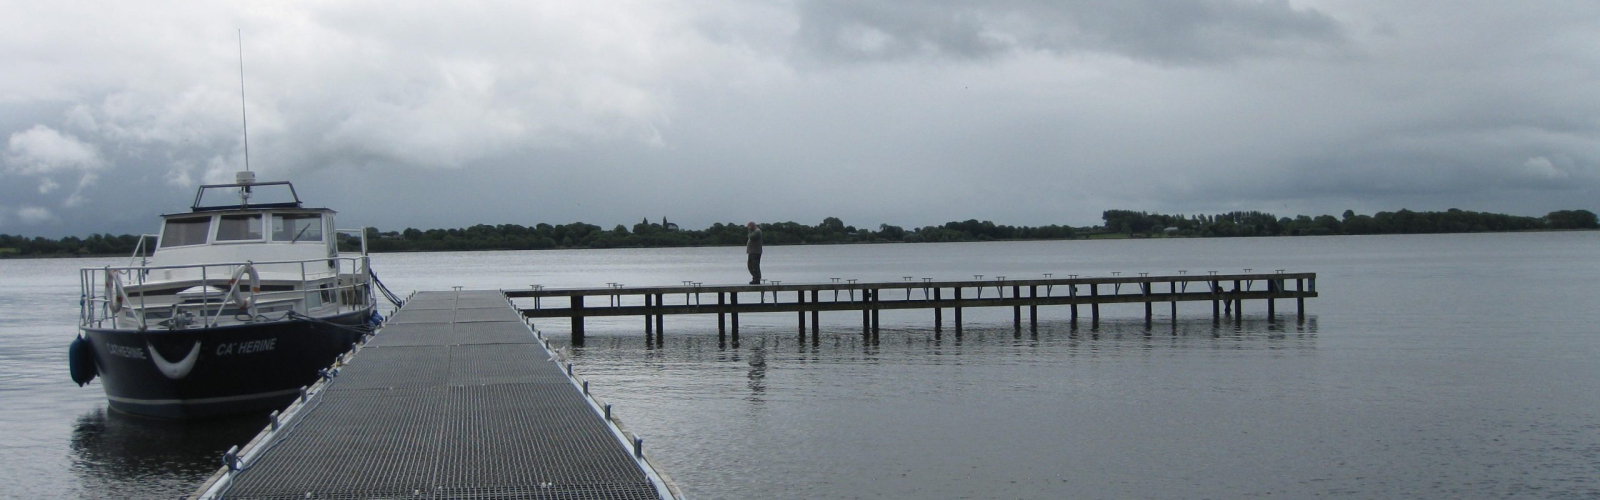 Ram’s Island Jetty and wider development funded through Lough Neagh Partnershipd